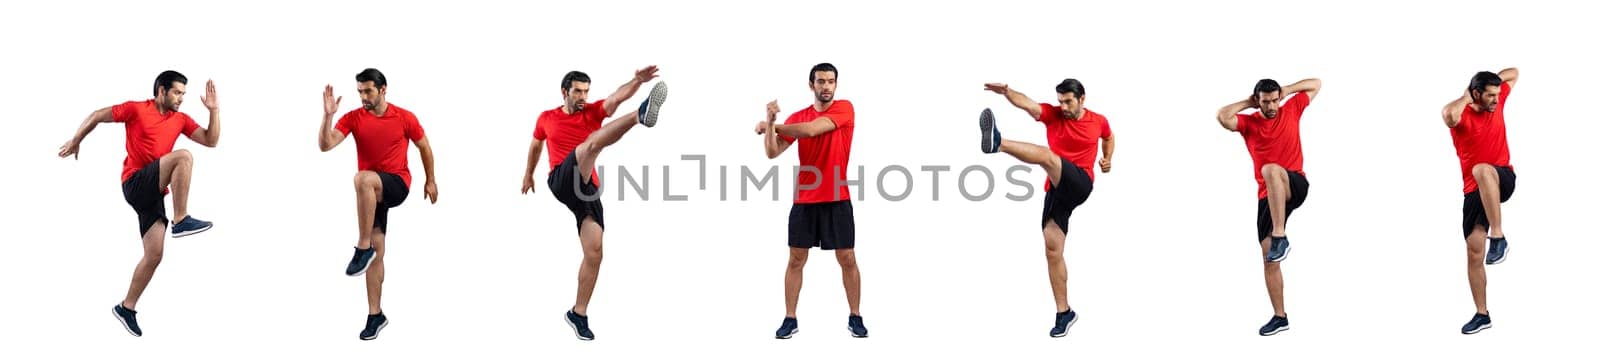 Healthy and active young man in sportswear with different professional fitness posture set of cardio training. Cardio running exercise on isolated background in gaiety full body length shot.